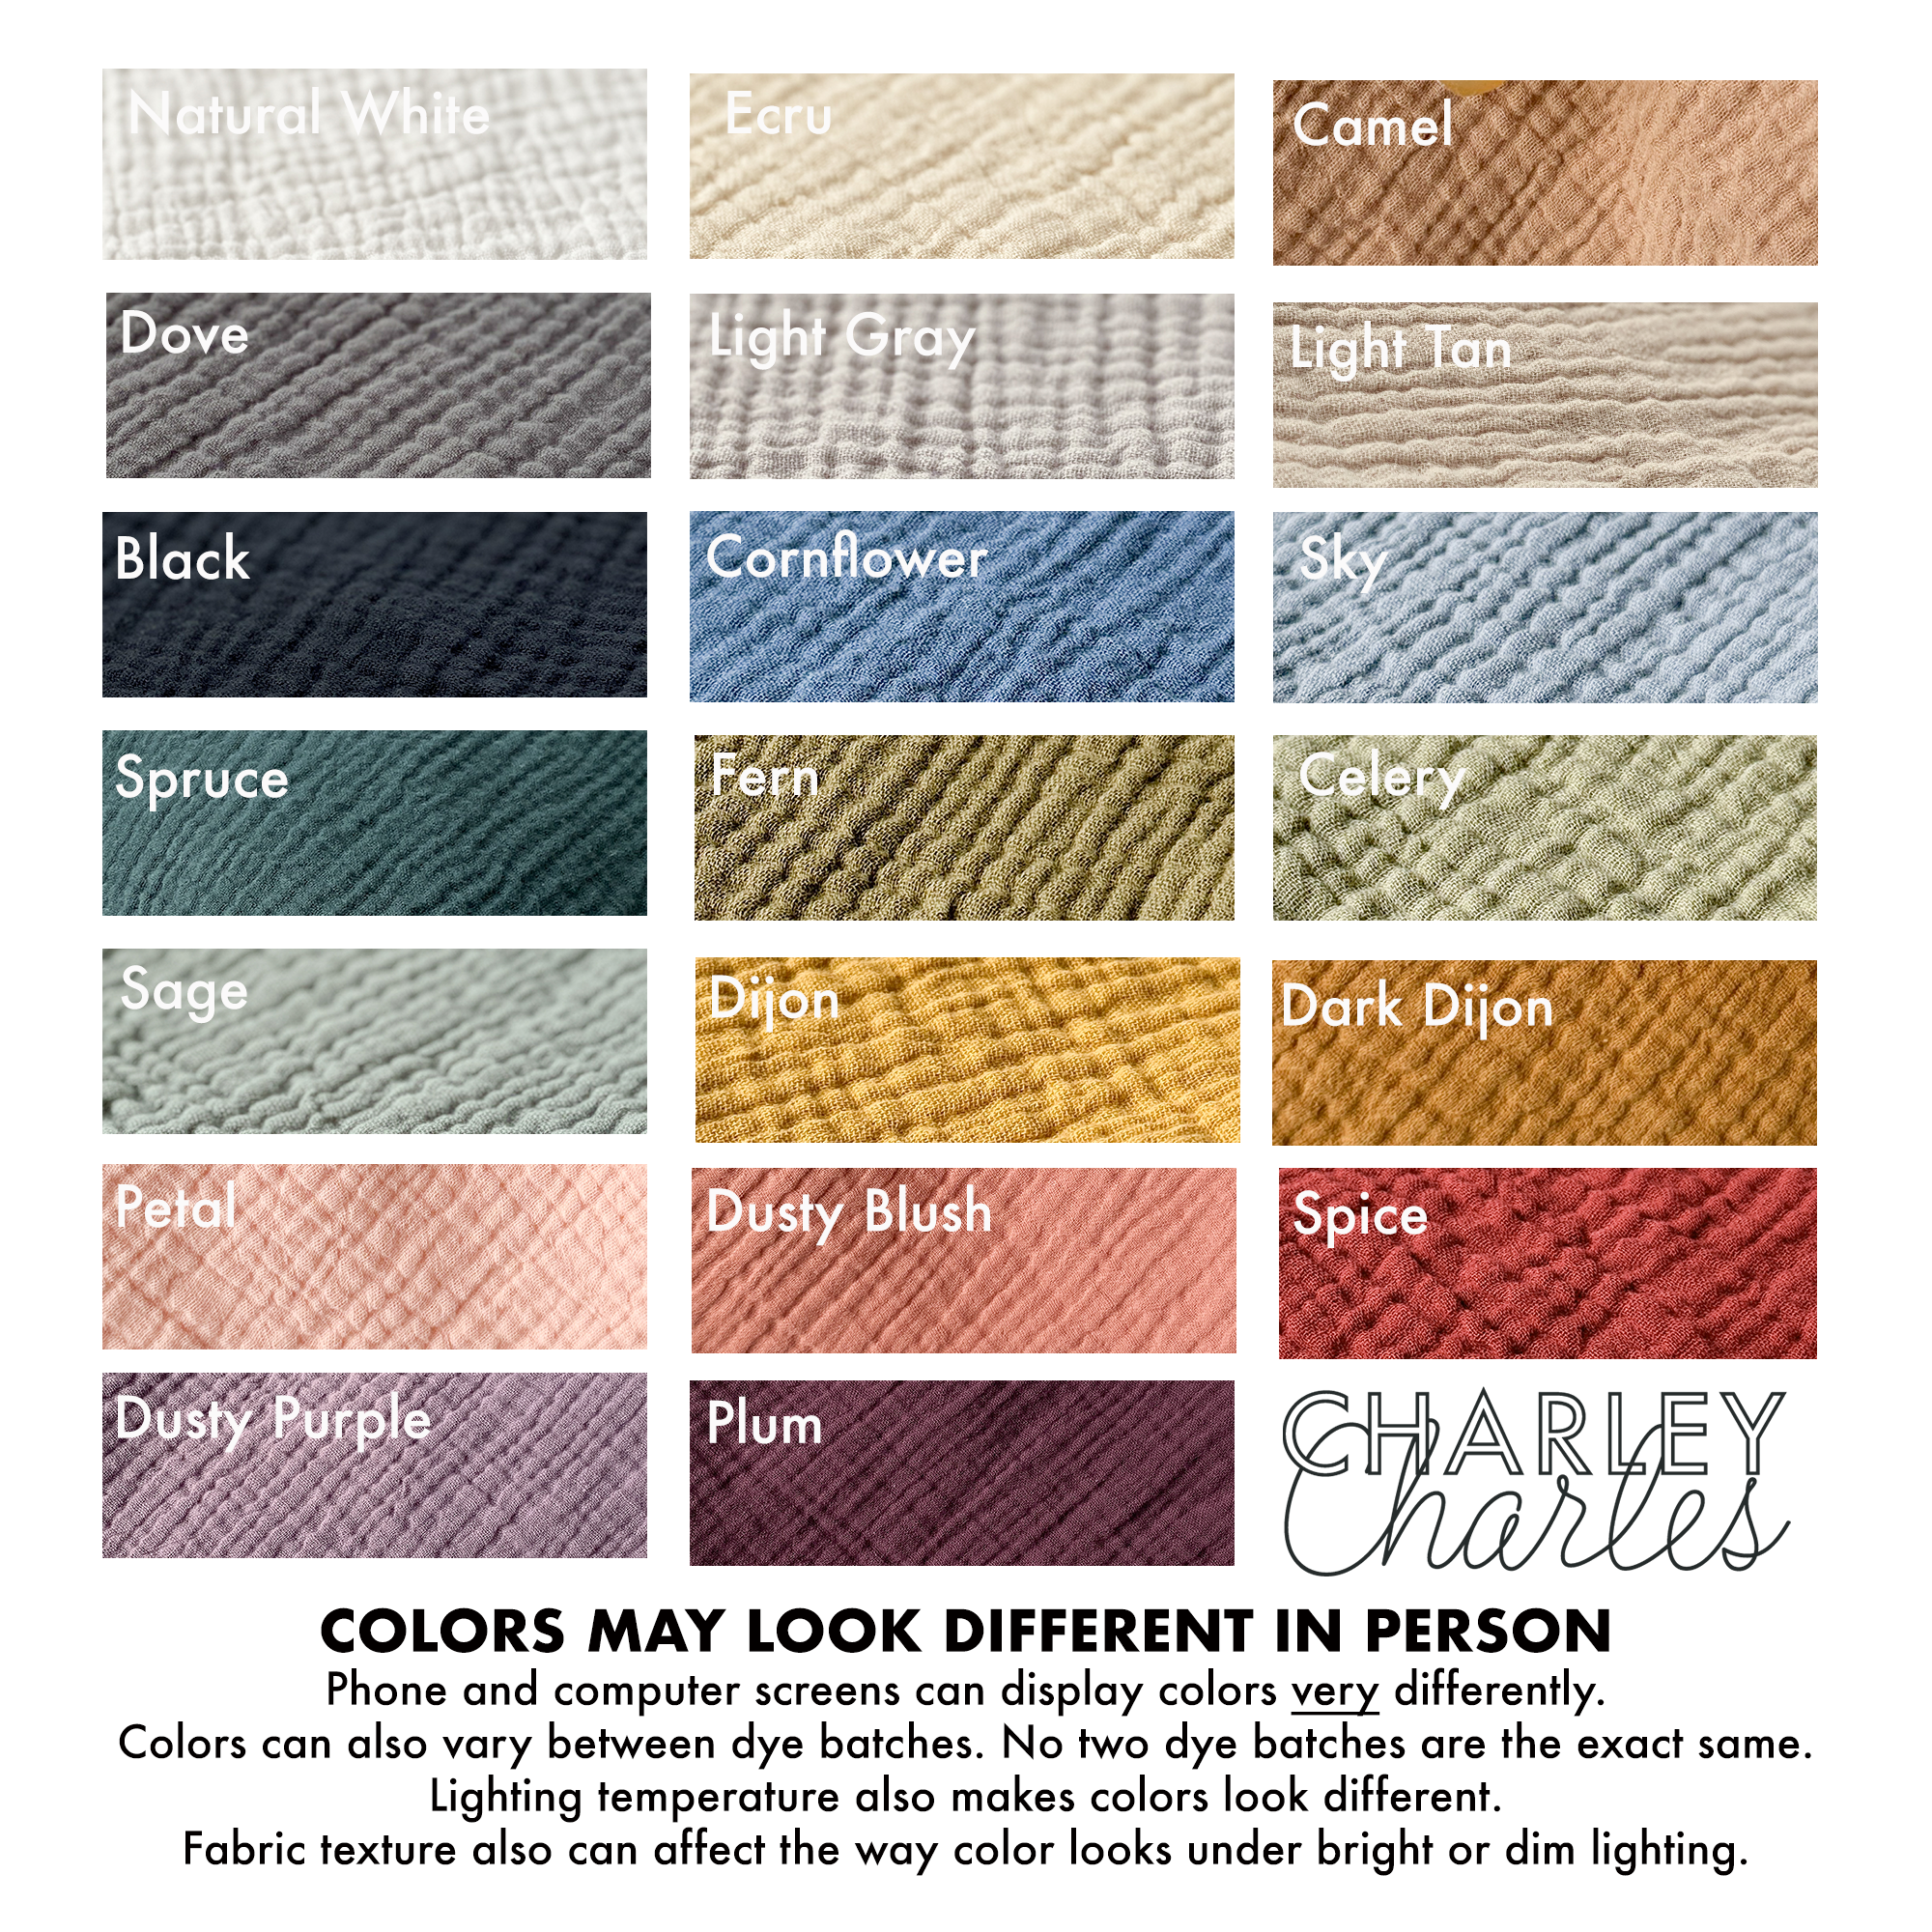 4 Layer Cotton Gauze Blanket - LARGE 42 X 53 / MORE COLORS AVAILABLE